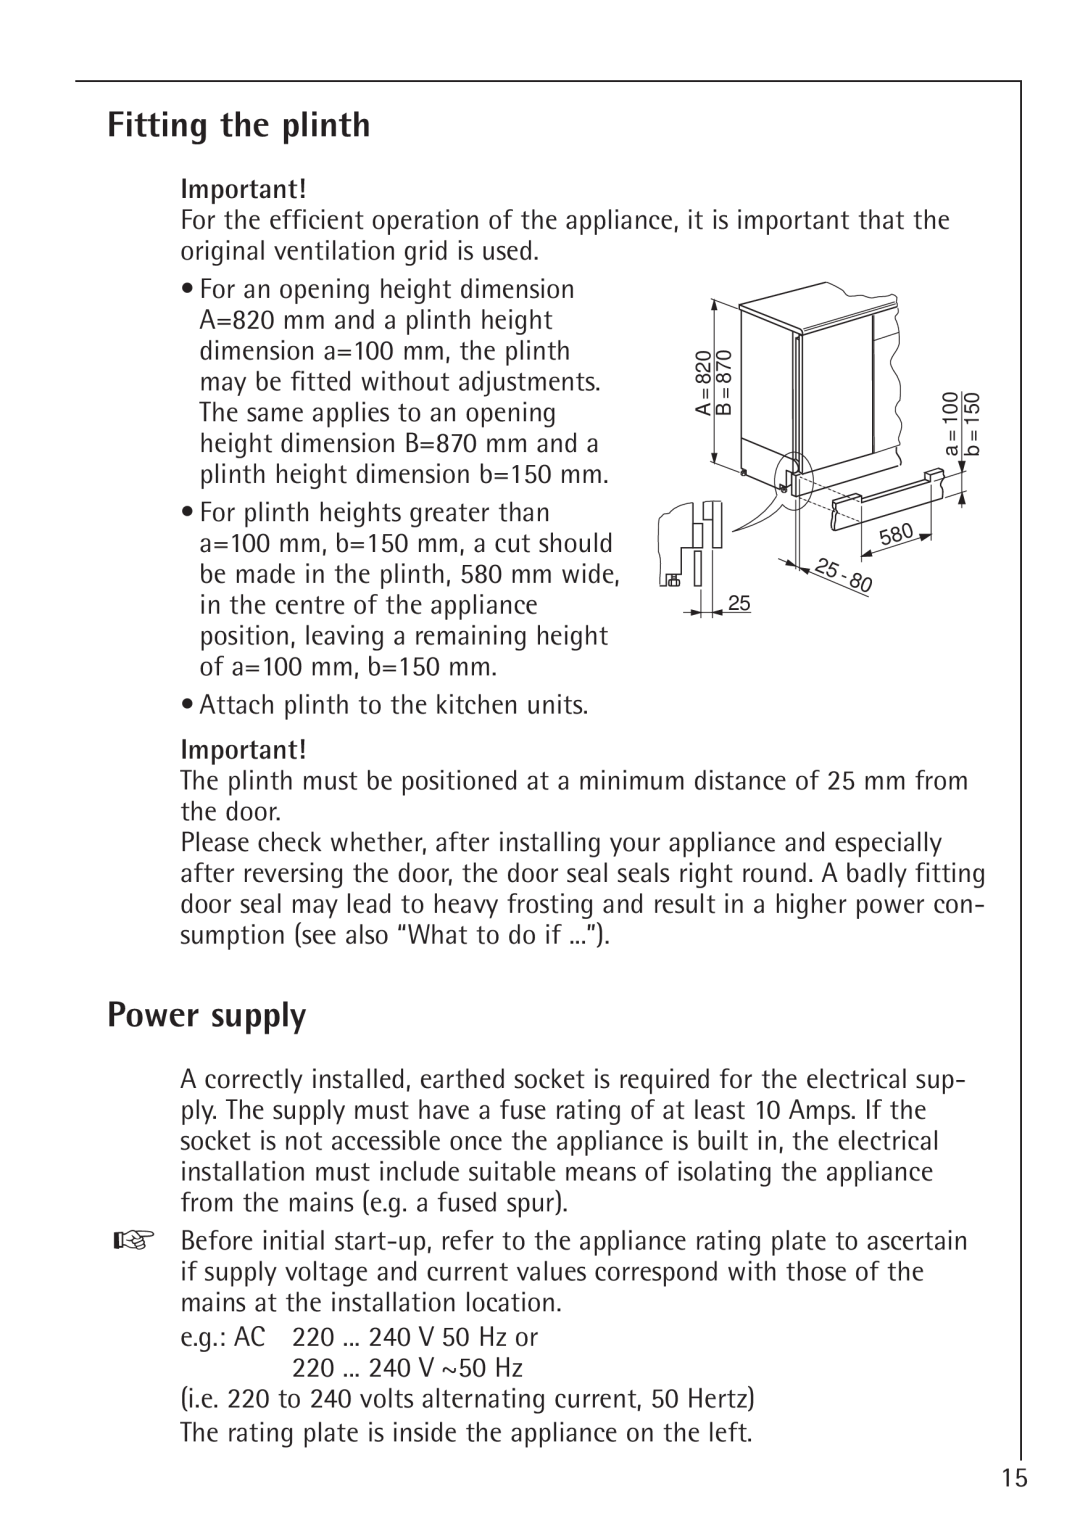 Electrolux 66050i installation instructions Fitting the plinth, Power supply 